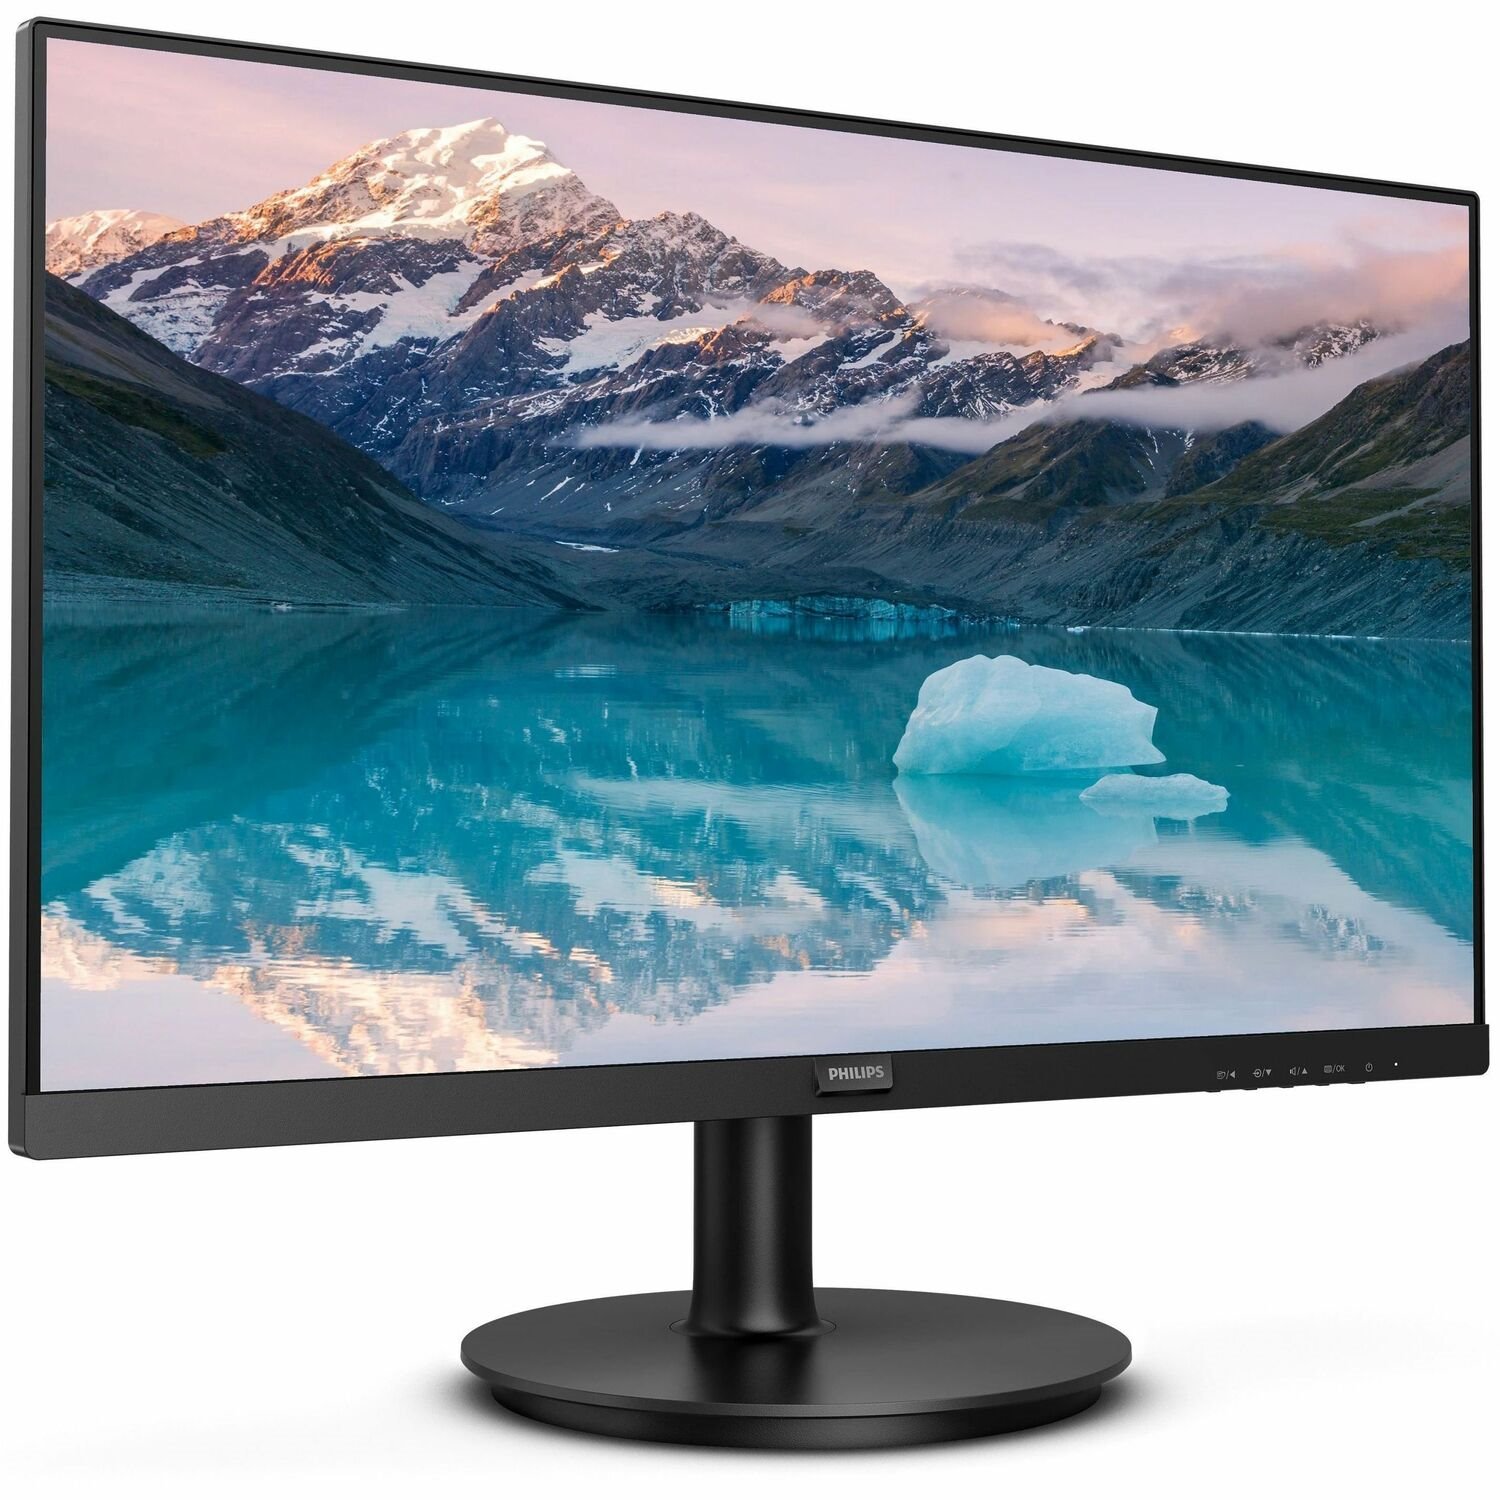 Philips S-line 221S9A 22" Class Full HD LED Monitor - 16:9 - Textured Black